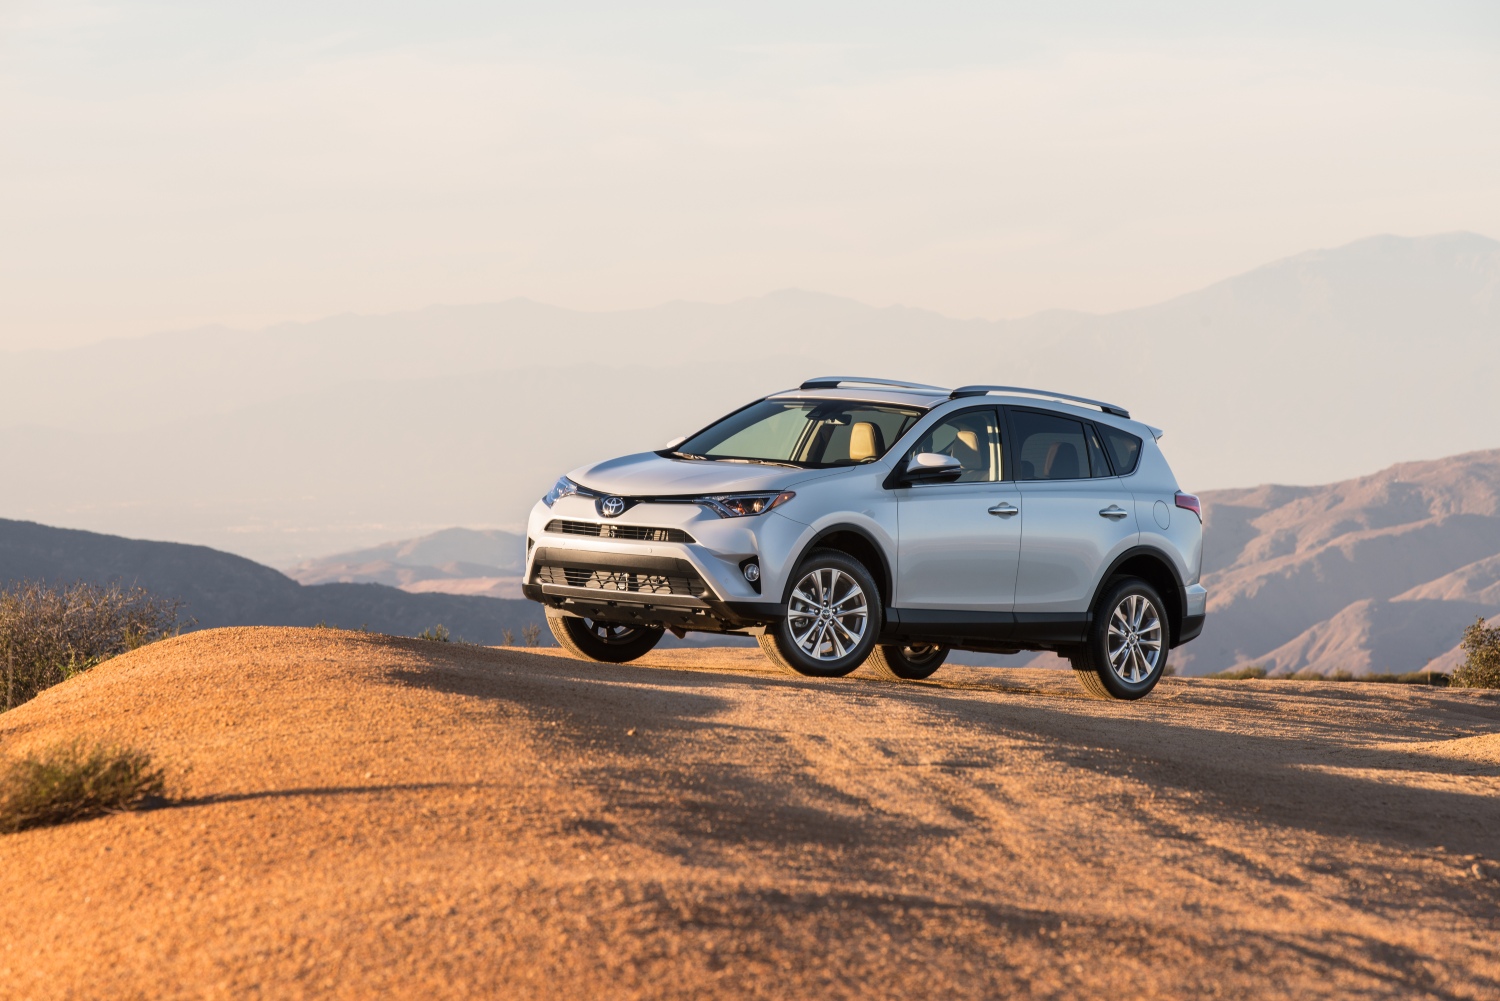 The safest compact SUVs from 2017 include this Toyota RAV4